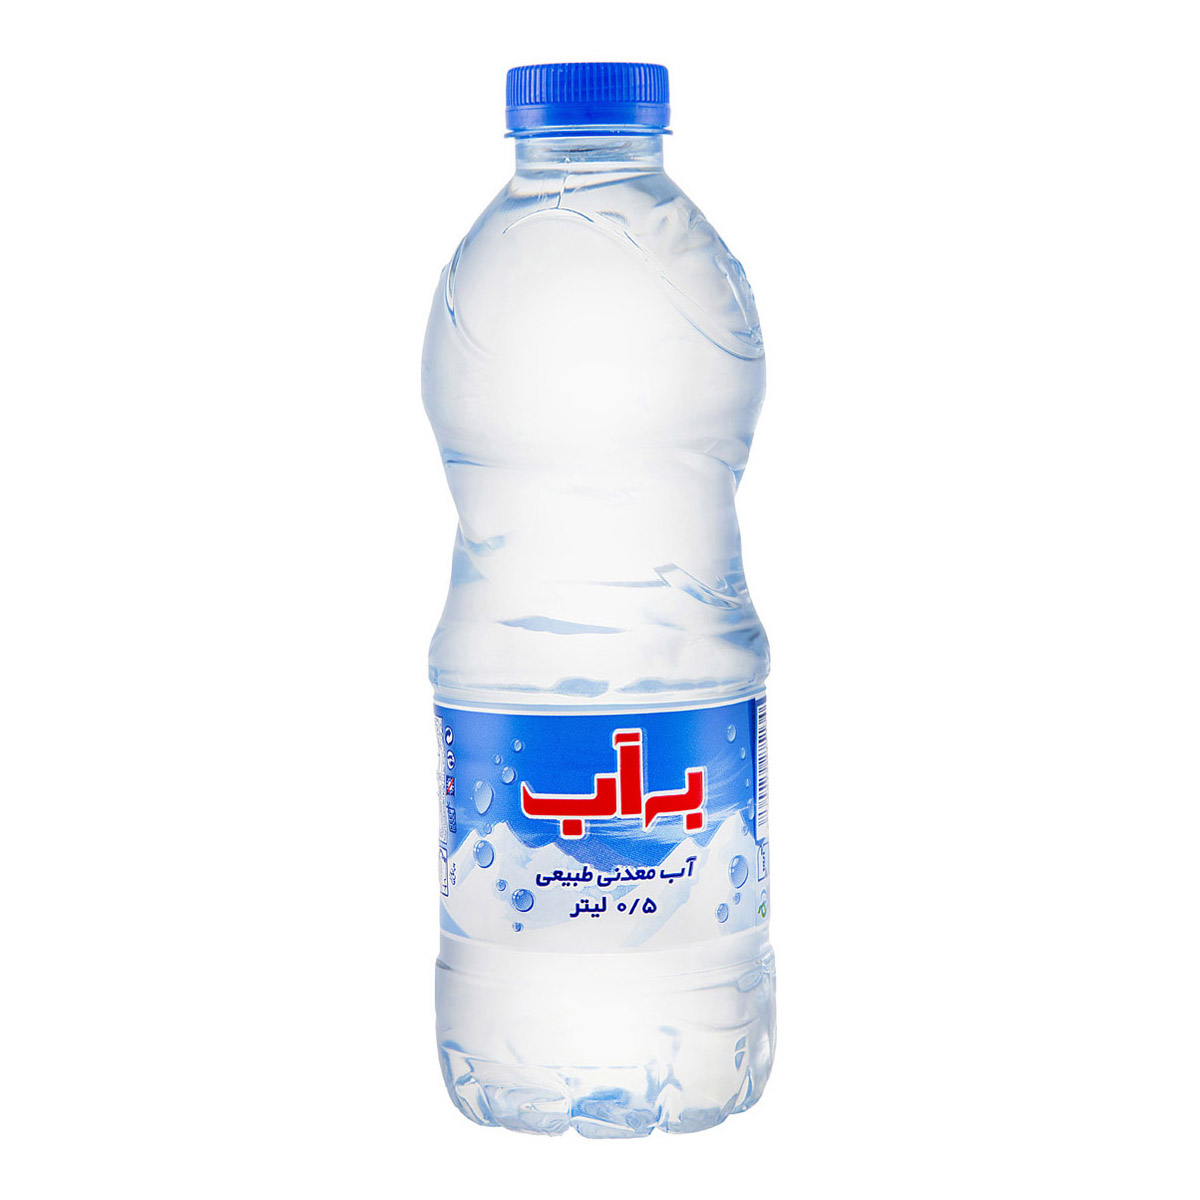 Mineral water to water